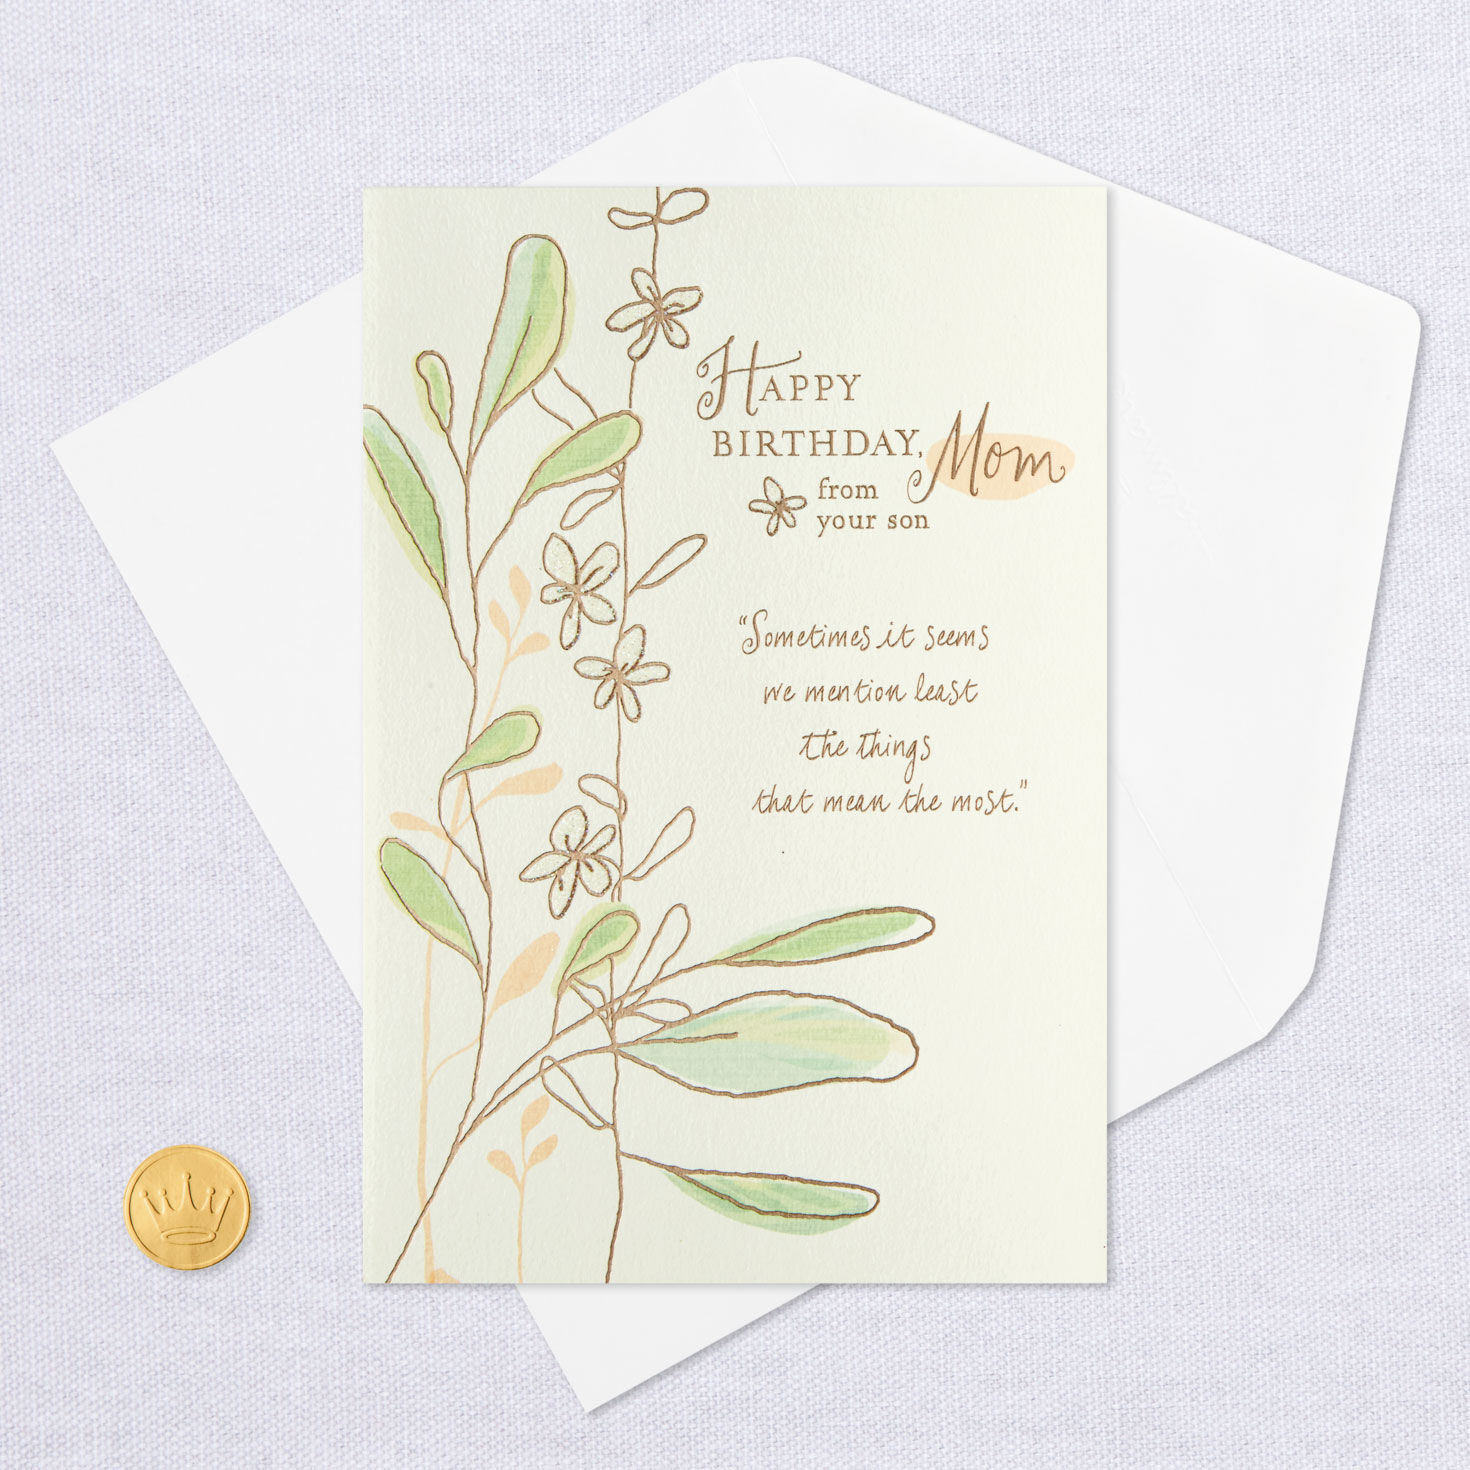 Love and Gratitude Birthday Card for Mom From Son for only USD 4.59 | Hallmark